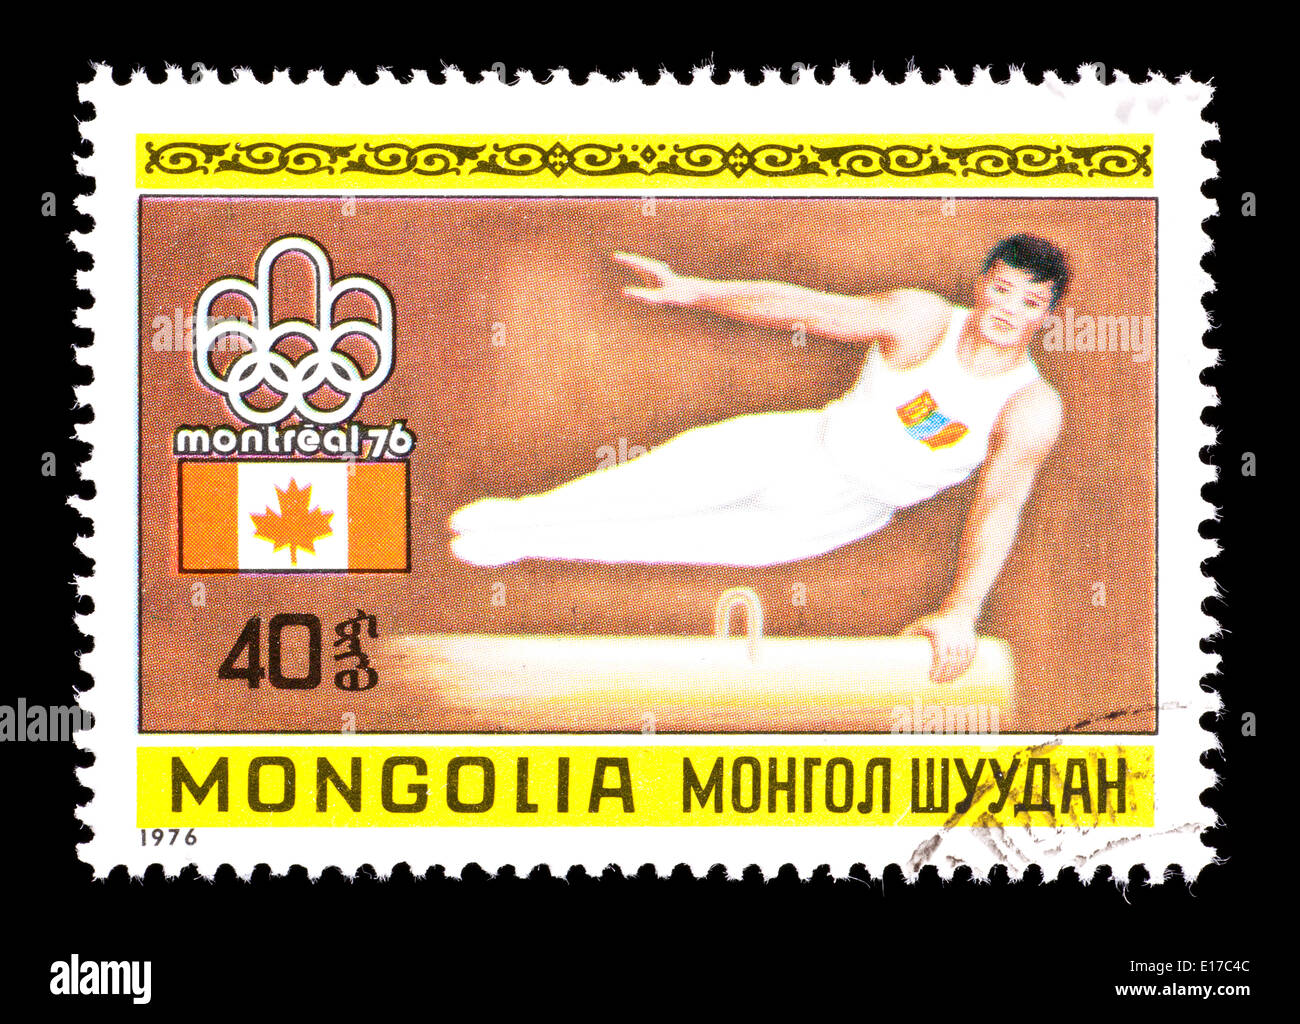 Postage stamp from Mongolia depicting a male gymnast on the pommel horse, issued for the 1976 Olympic Games in Montreal, Canada. Stock Photo